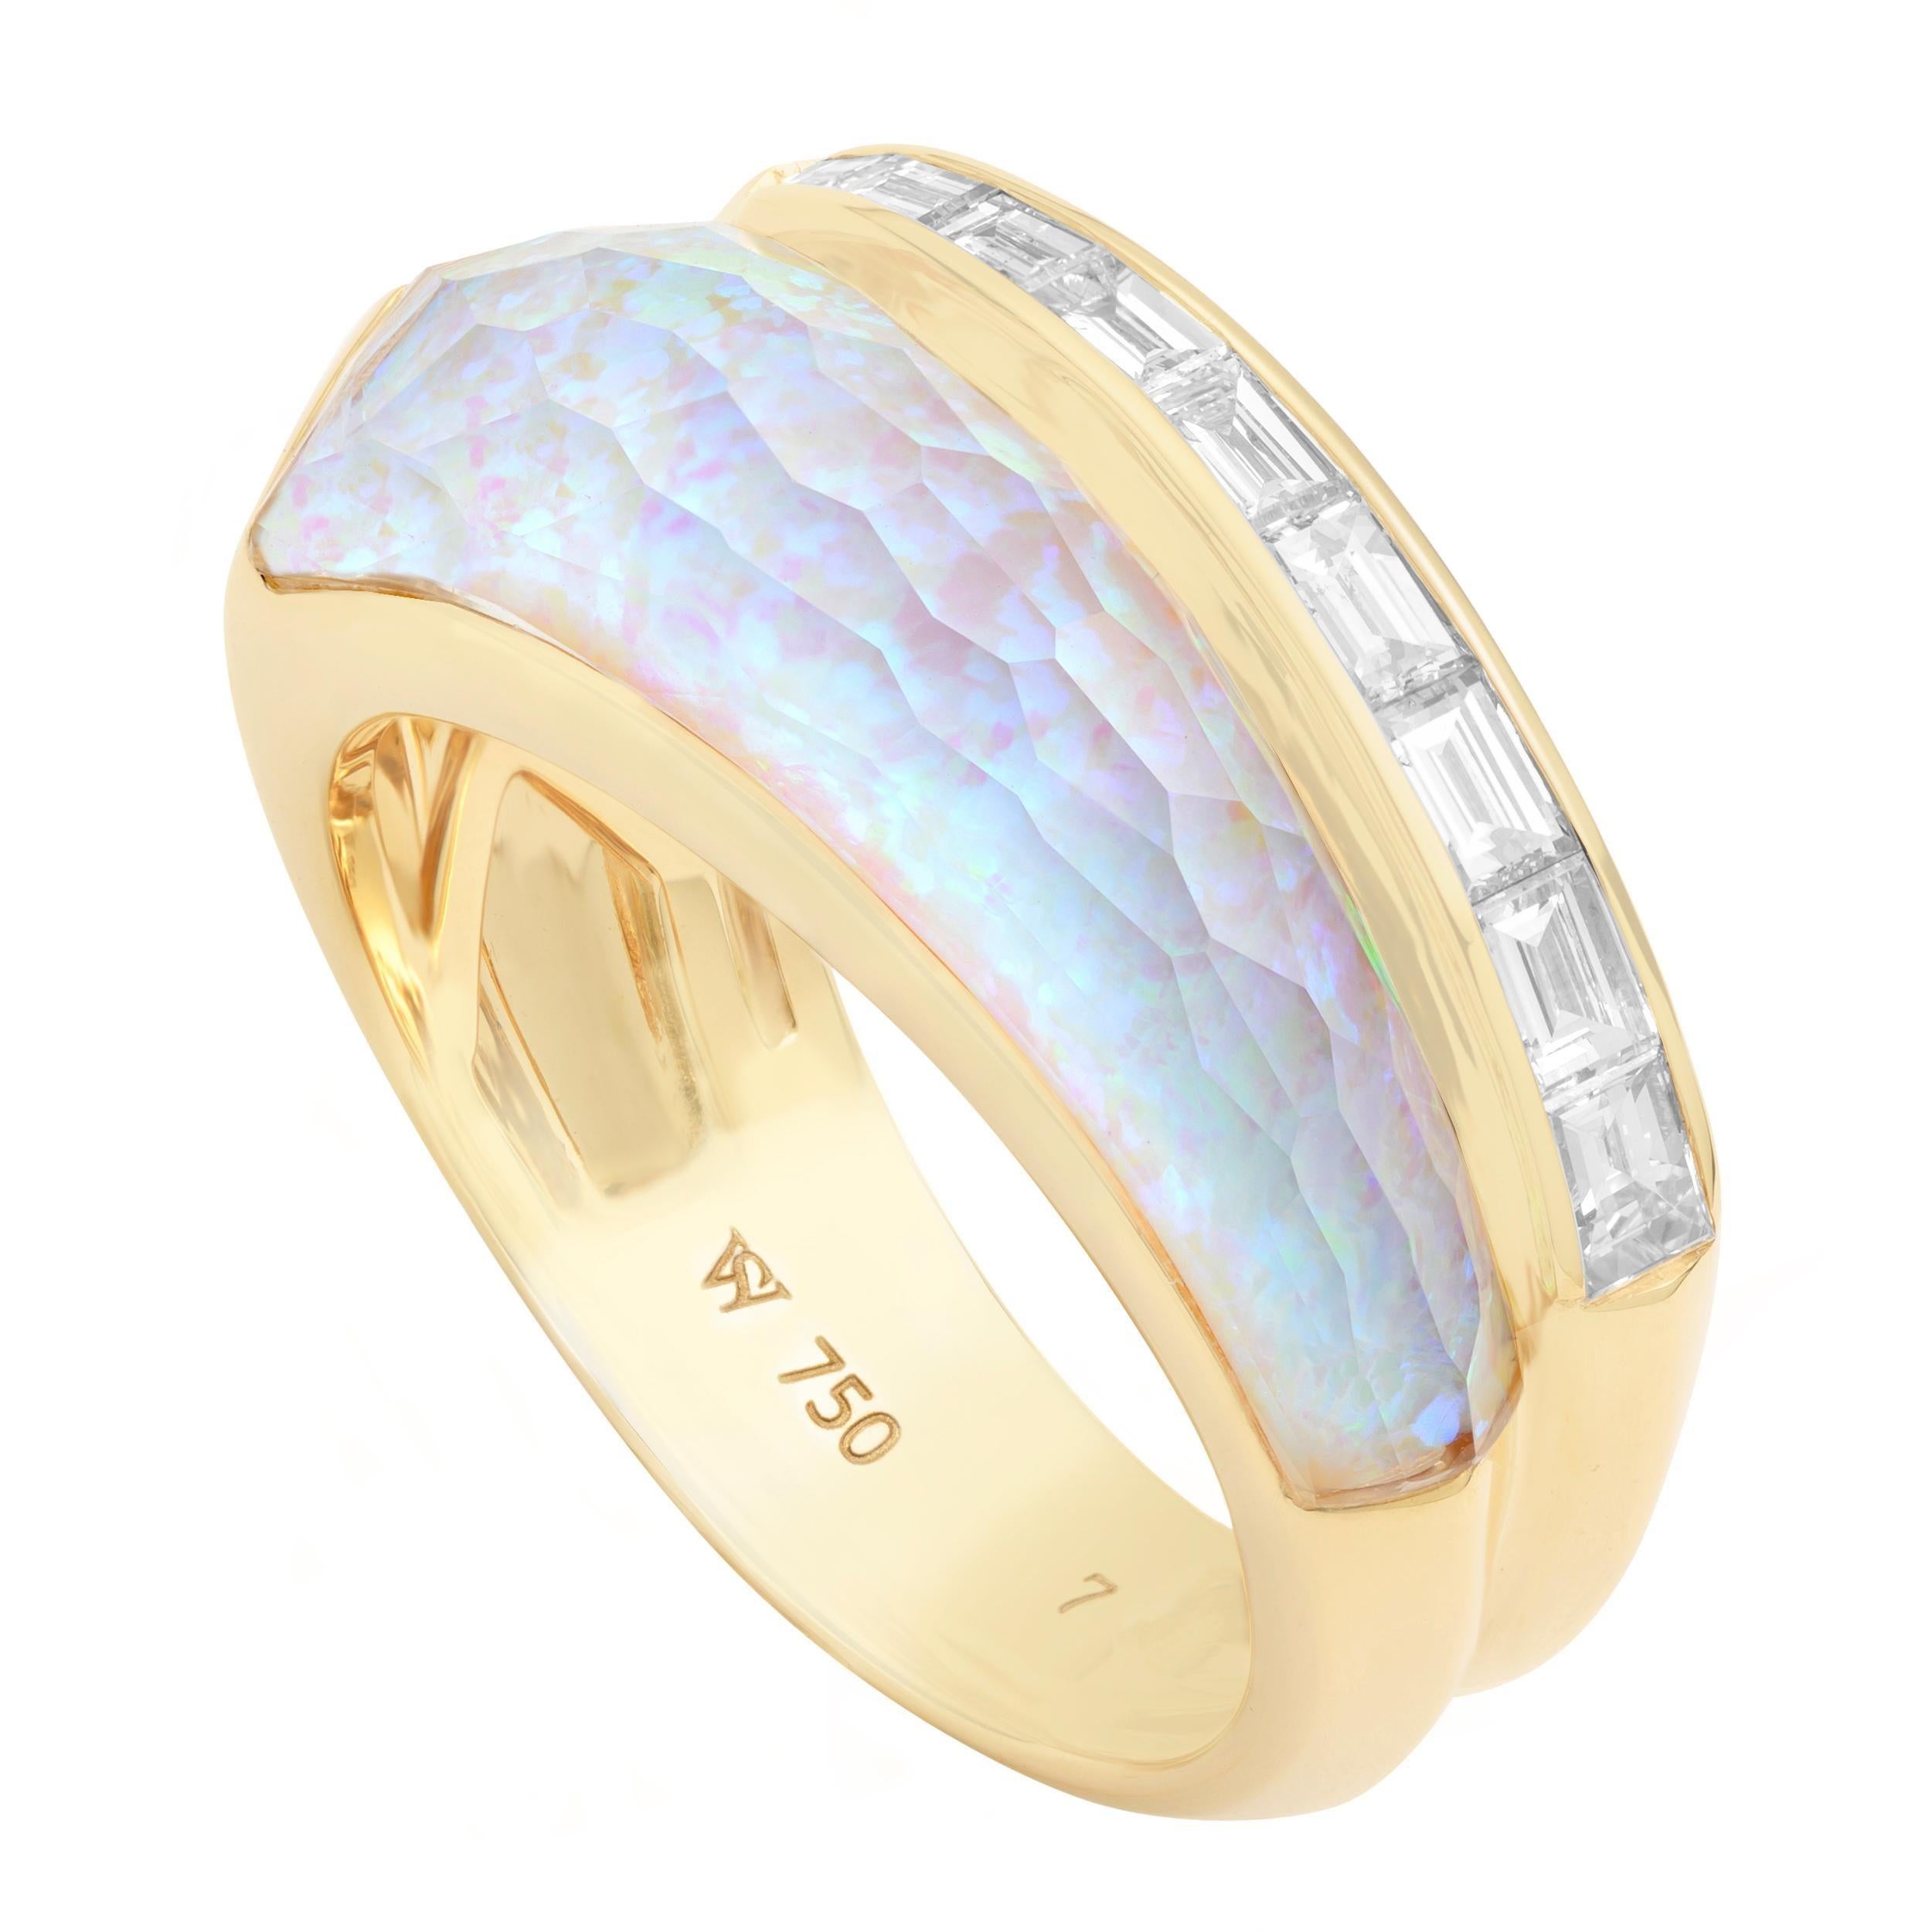 Stephen Webster CH₂ White Opalescent Crystal Haze and Diamonds Slimline Ring 4